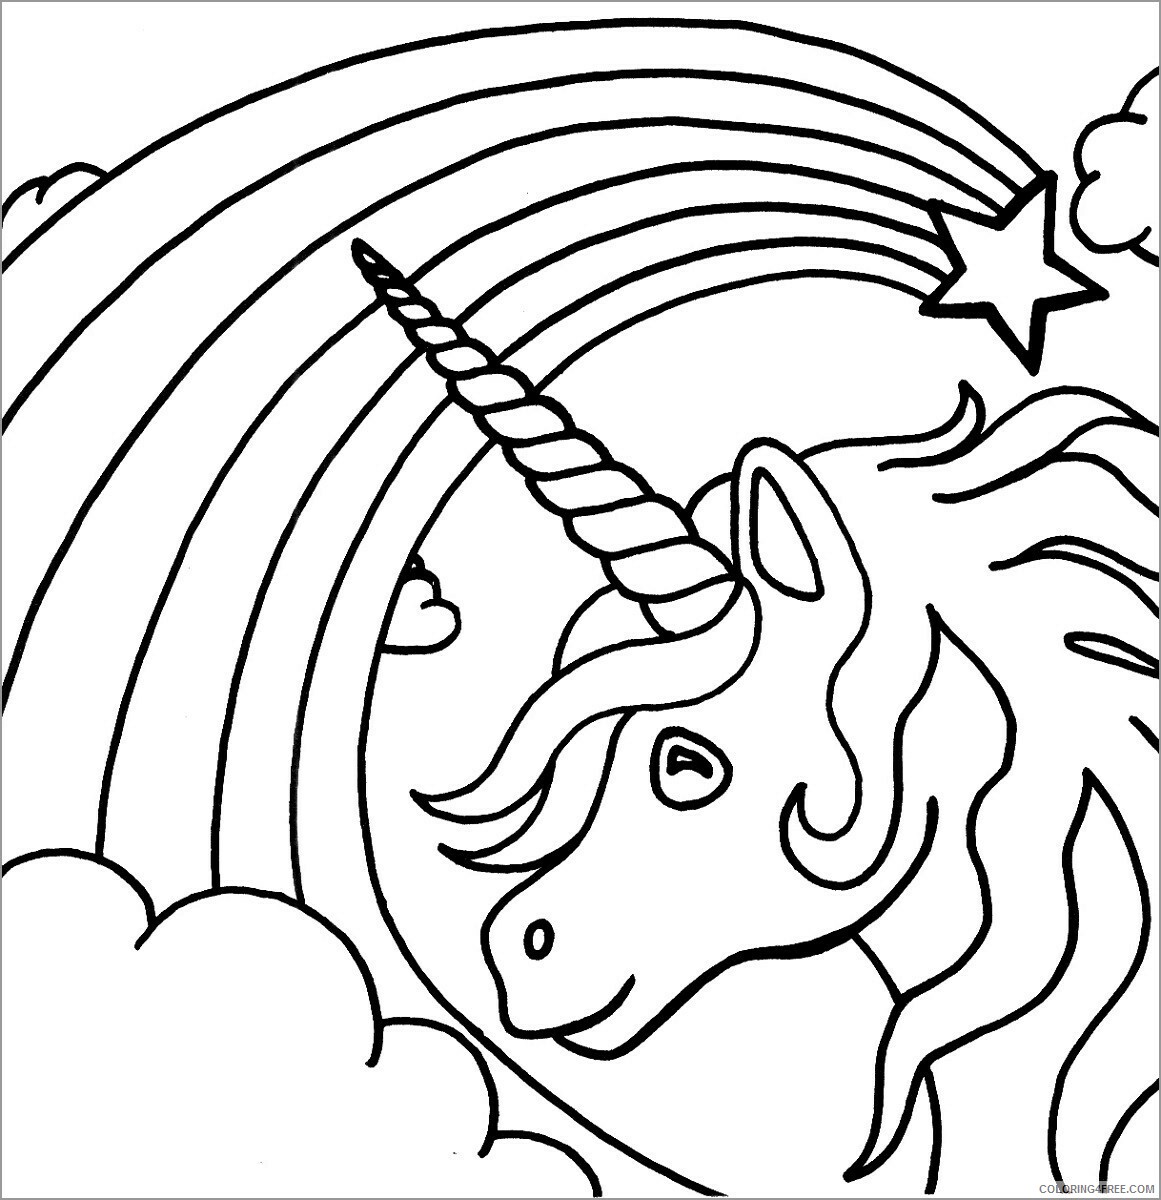 Rainbow Coloring Pages unicorn star and rainbow Printable 2021 5049 Coloring4free